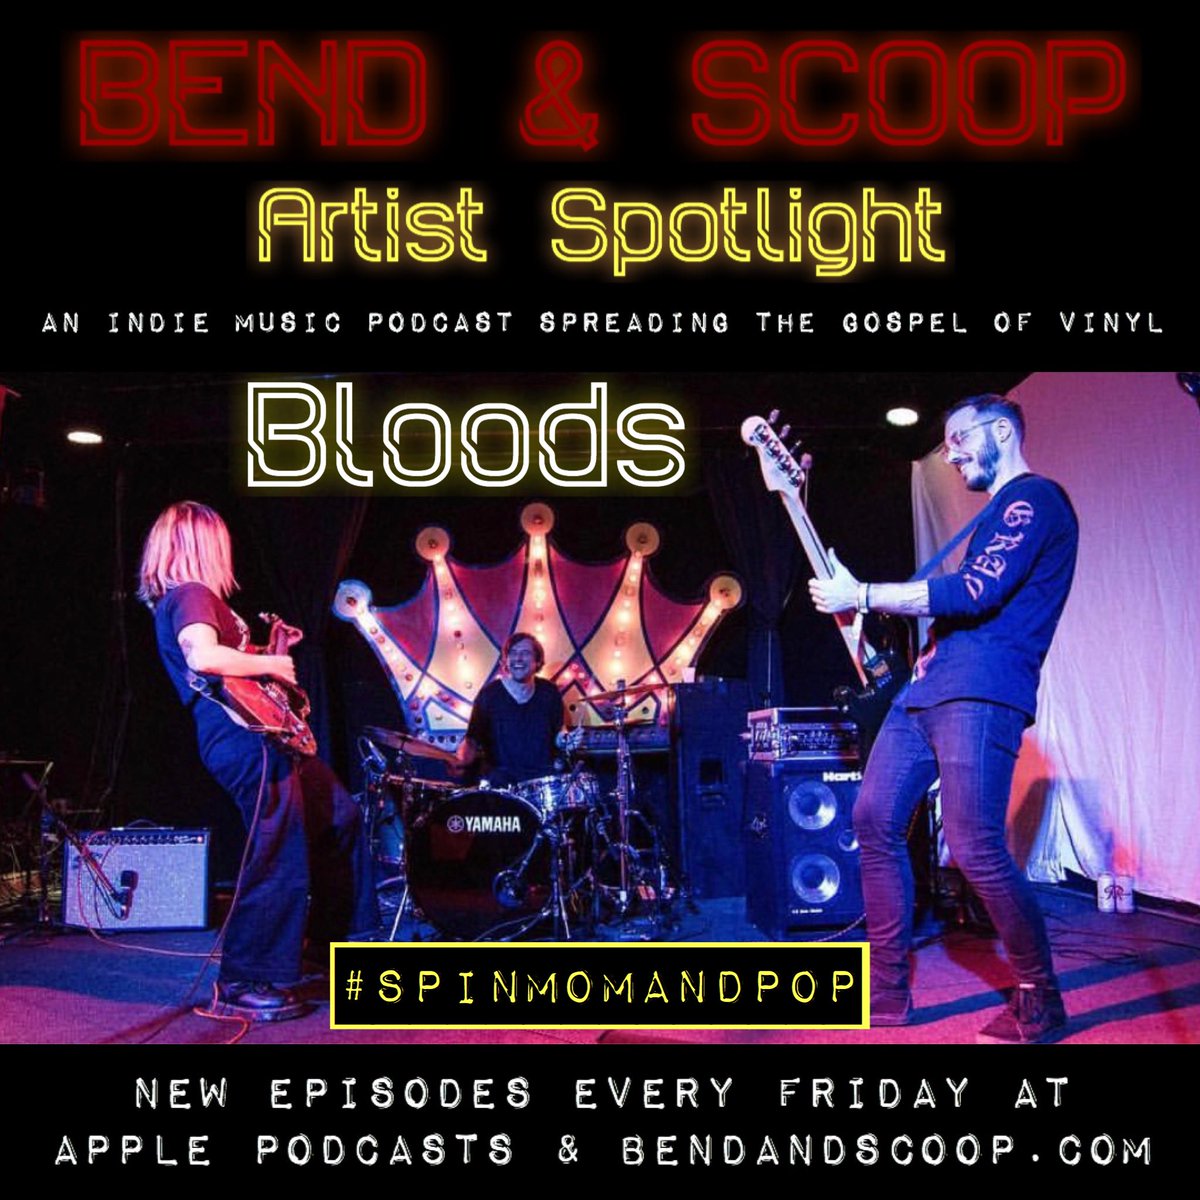 One of the artists featured on the latest episode of Bend & Scoop is Bloods (@bloodsband).  If you have a chance, check them out!  You can check us out at bendandscoop.com or Apple & Google Podcasts - new episodes every Friday...
#SpinMomAndPop